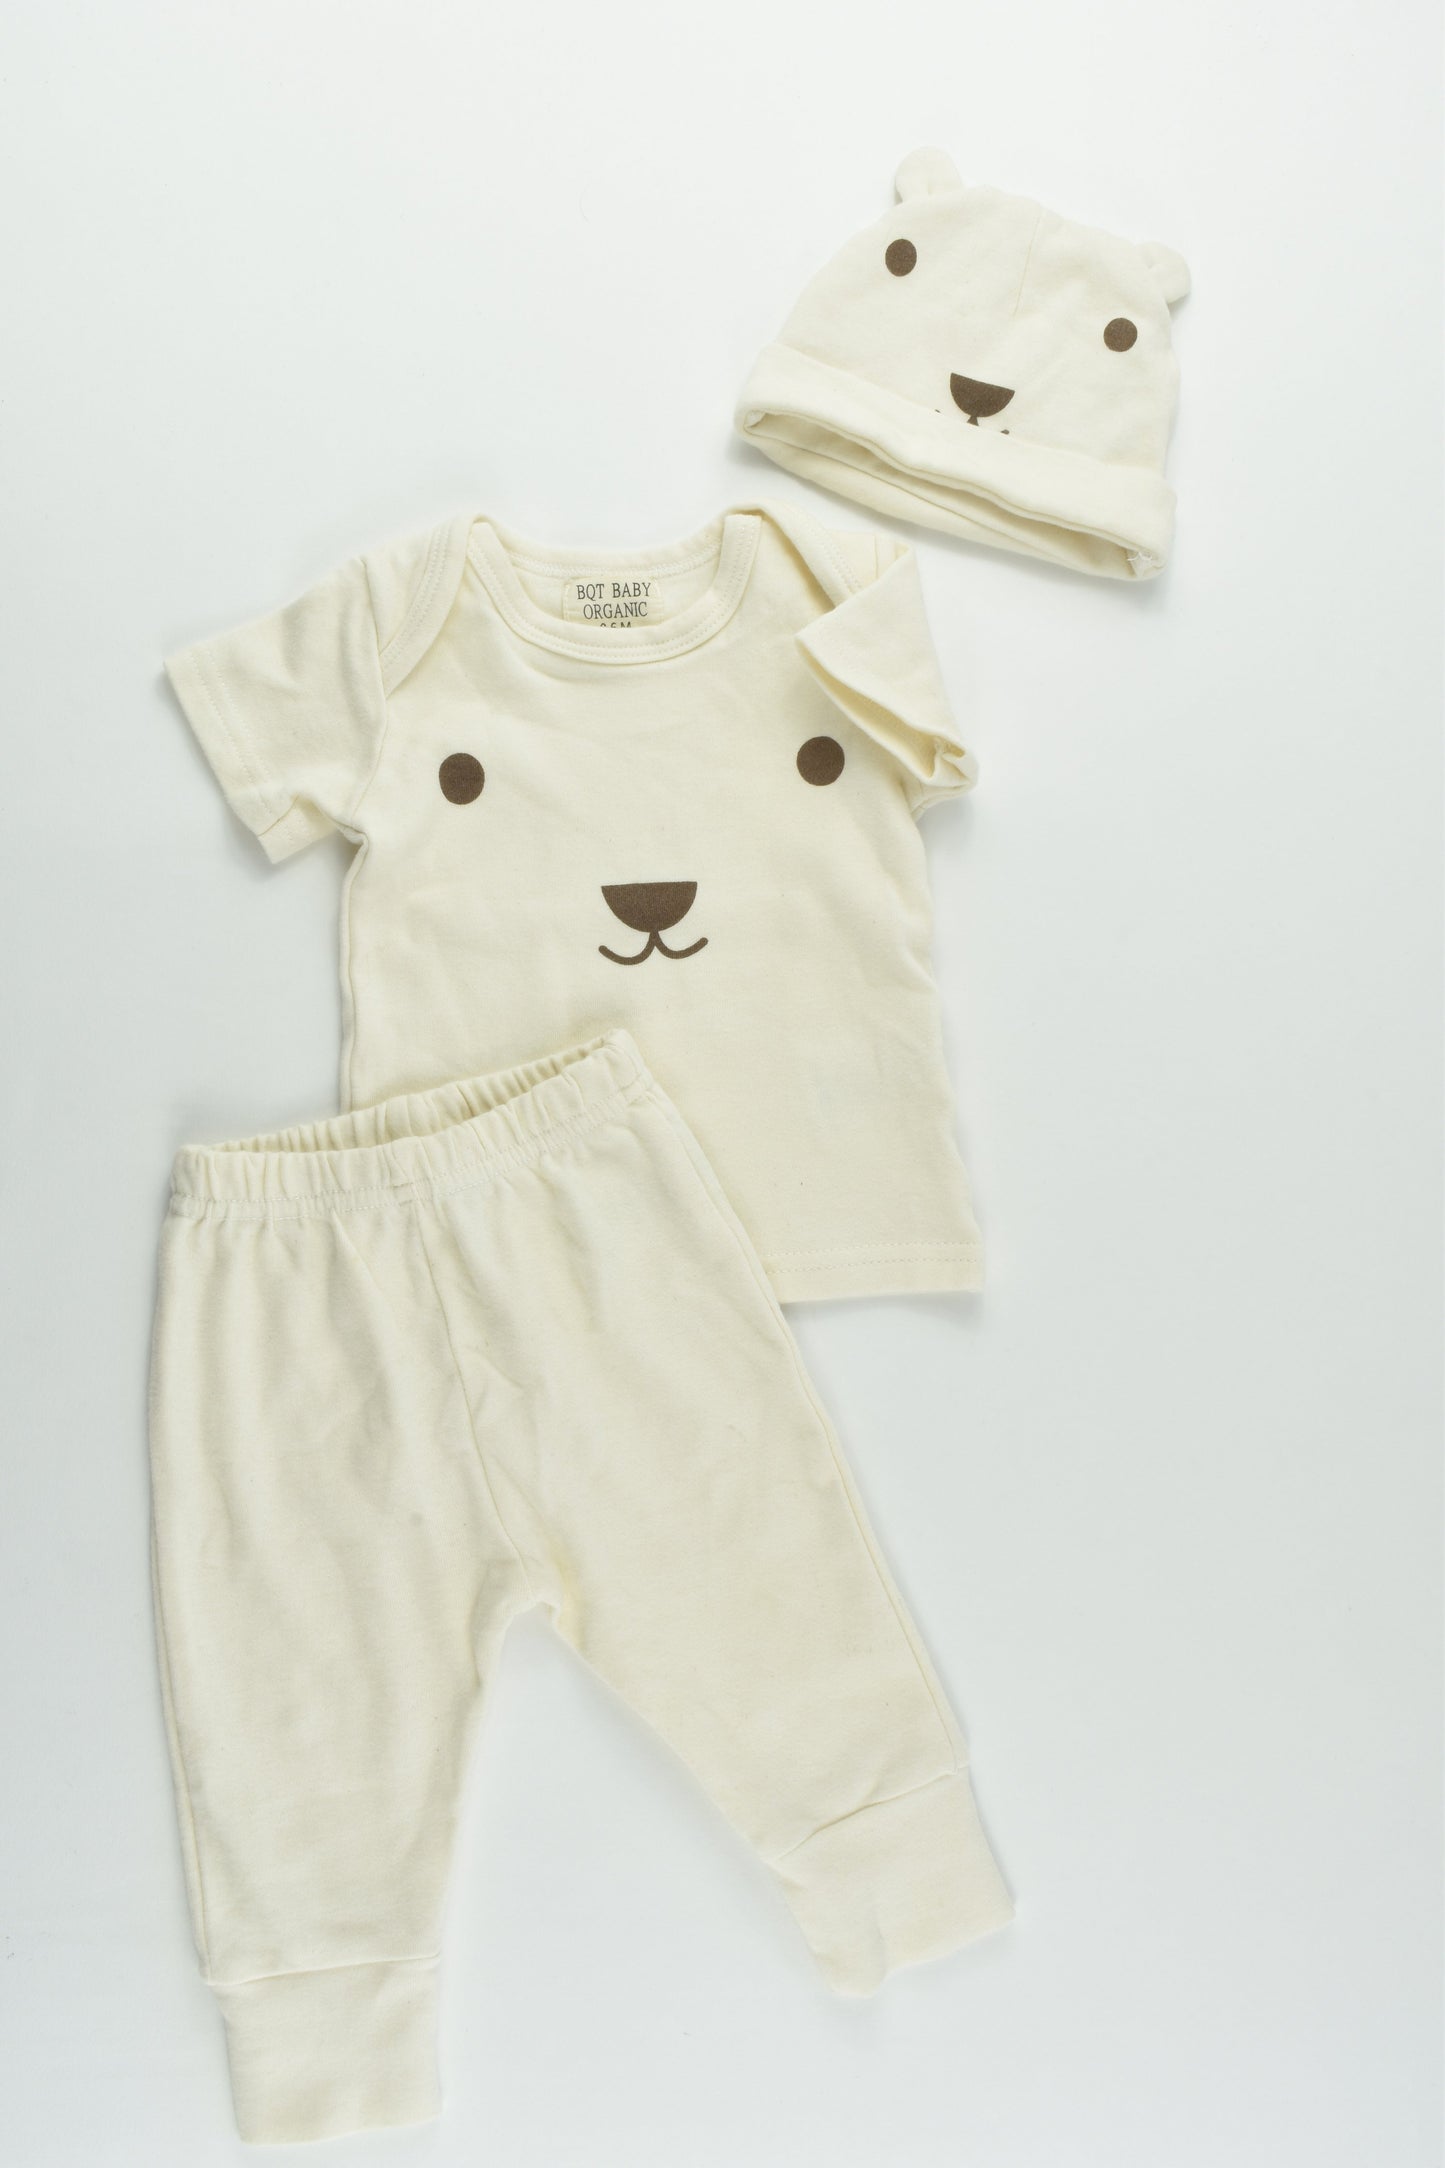 BQT Baby Organic Size 000-00 (0-6 months) Teddy Bear Outfit